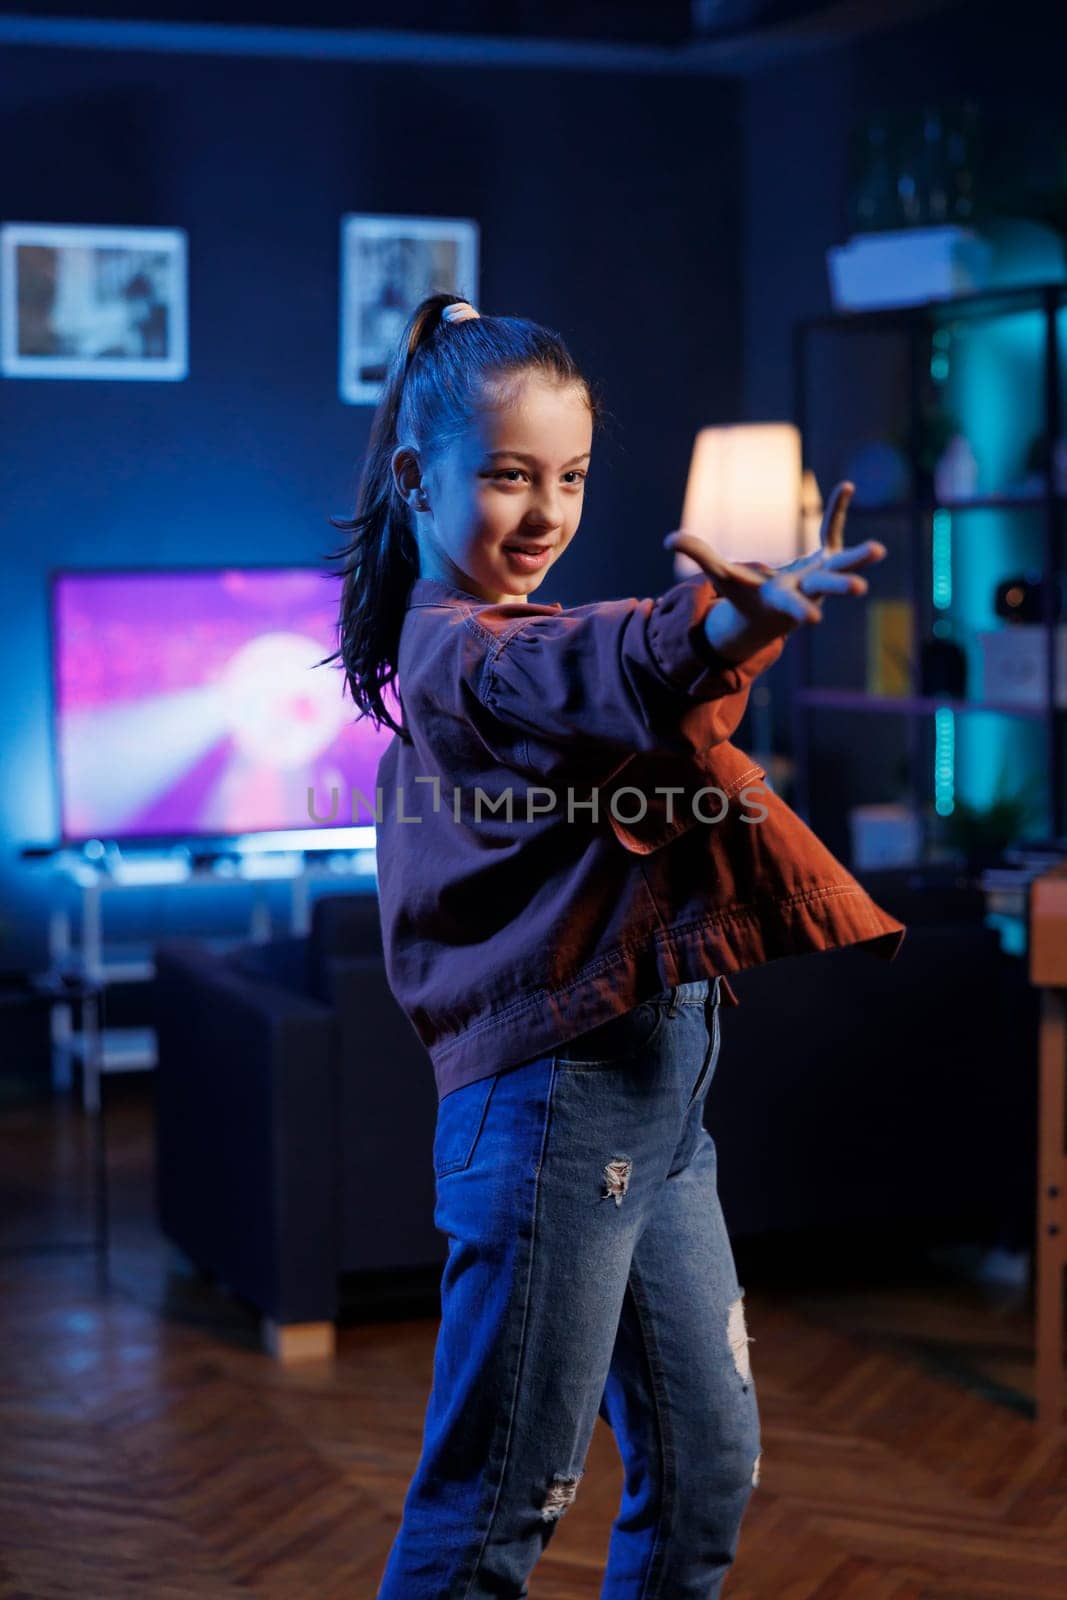 Young child doing viral dance for social media platforms while listening to popular hit song. Small girl recording dancing video for her internet fans on latest viral music